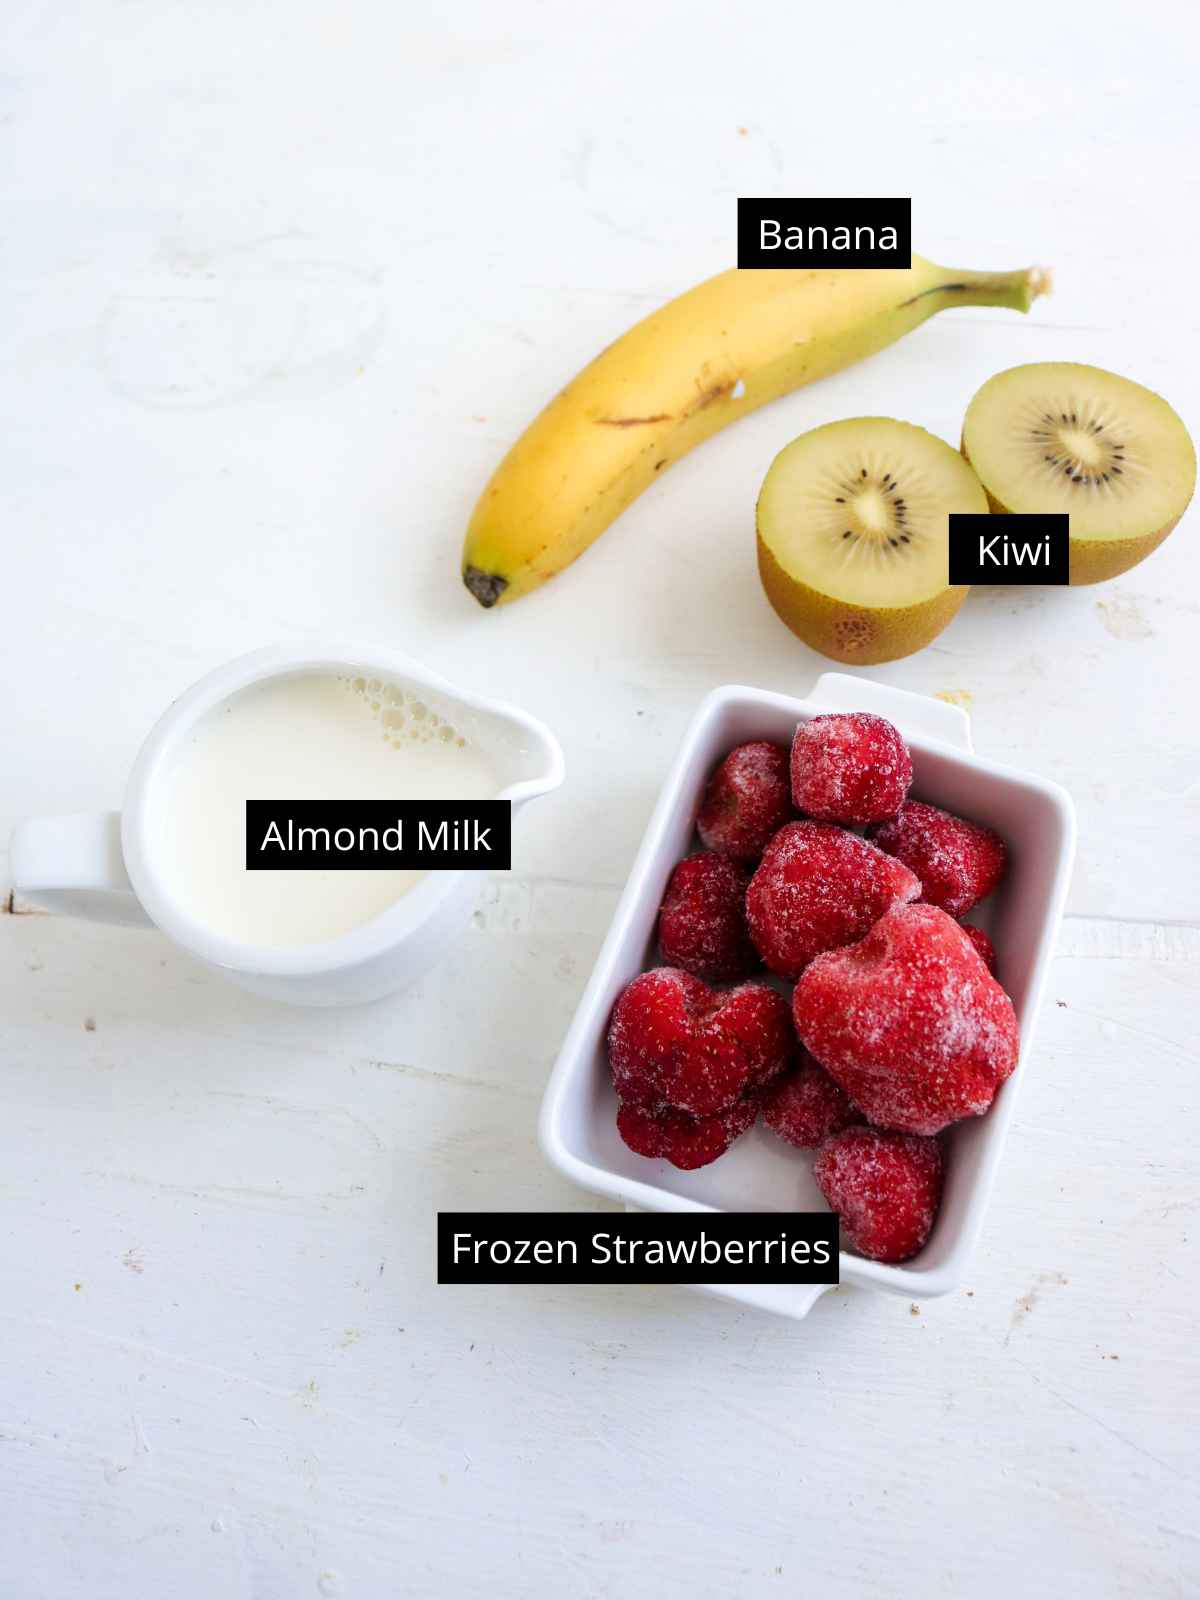 yellow banana, 2 kiwi halves, almond milk in a white pot and frozen strawberries in a white dish placed on a white background.